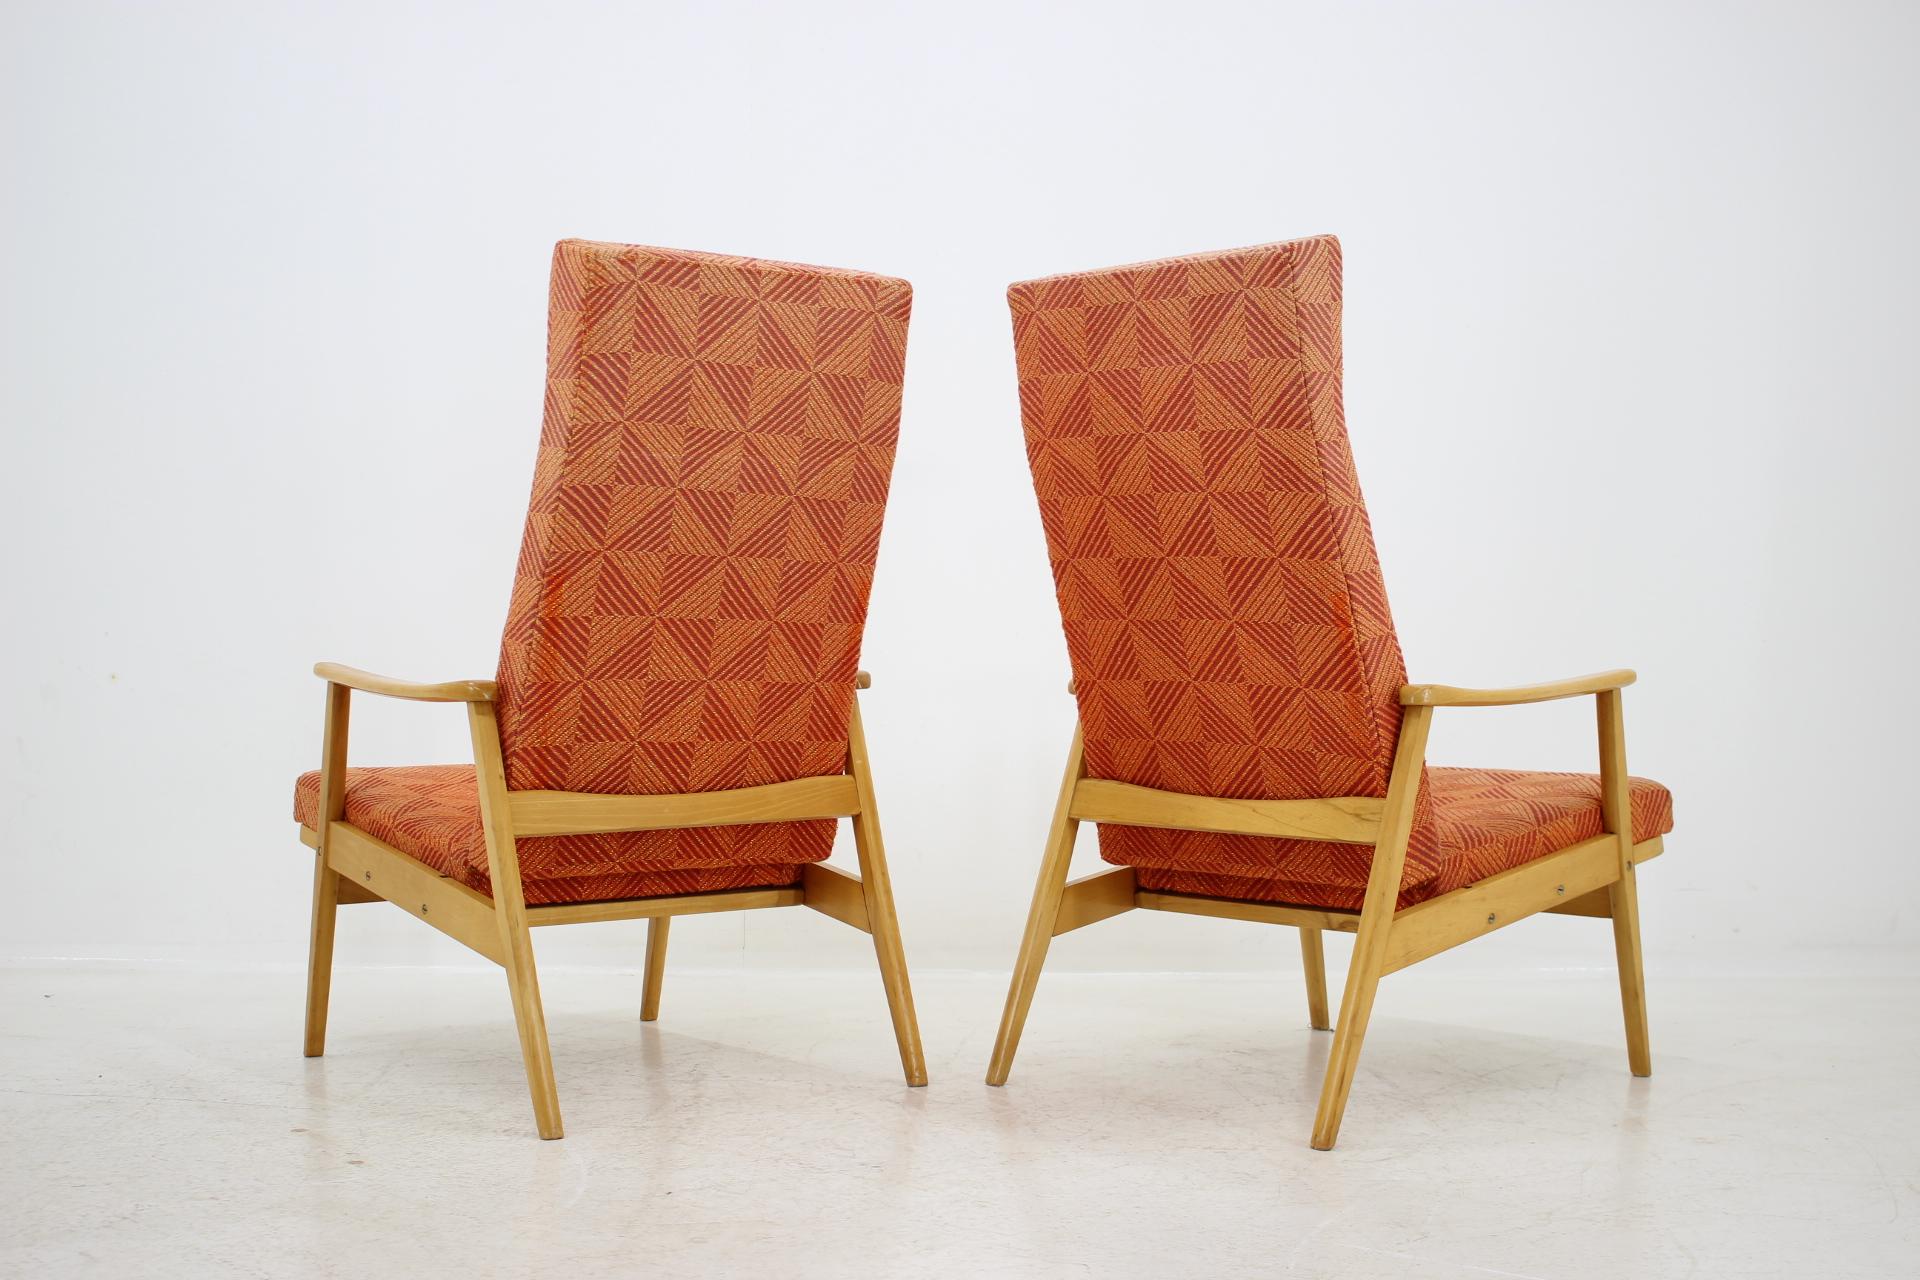 Set of Two Adjustable Armchairs with Footstools, Thon, 1970 In Good Condition For Sale In Praha, CZ